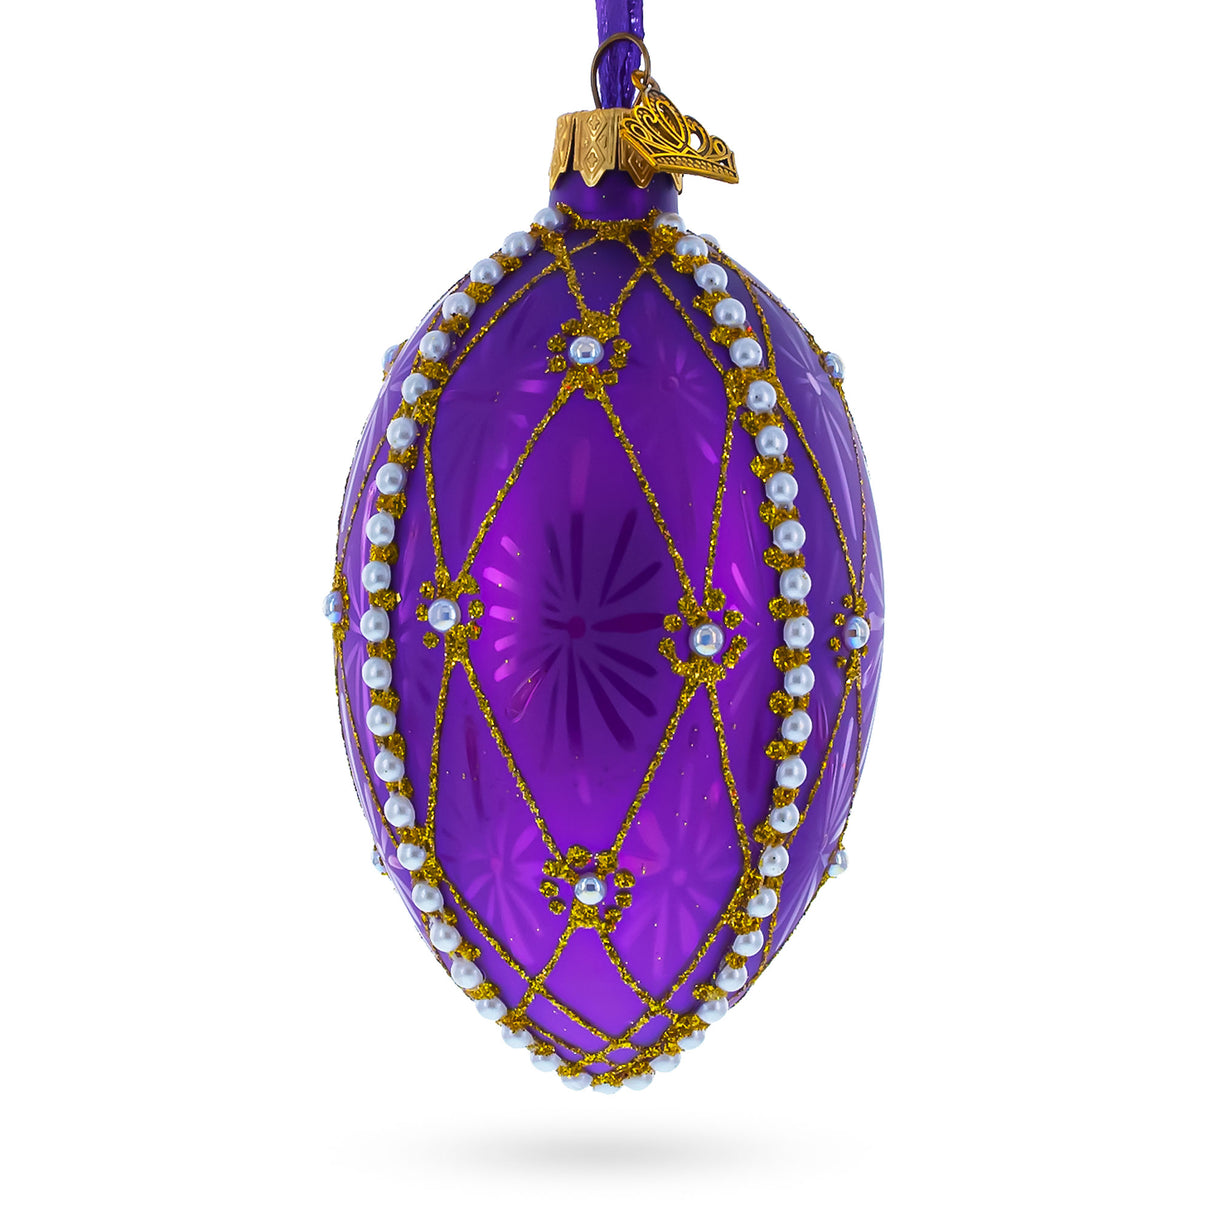 Pearls On Purple Guilloche Glass Egg Christmas Ornament 4 Inches in Purple color, Oval shape